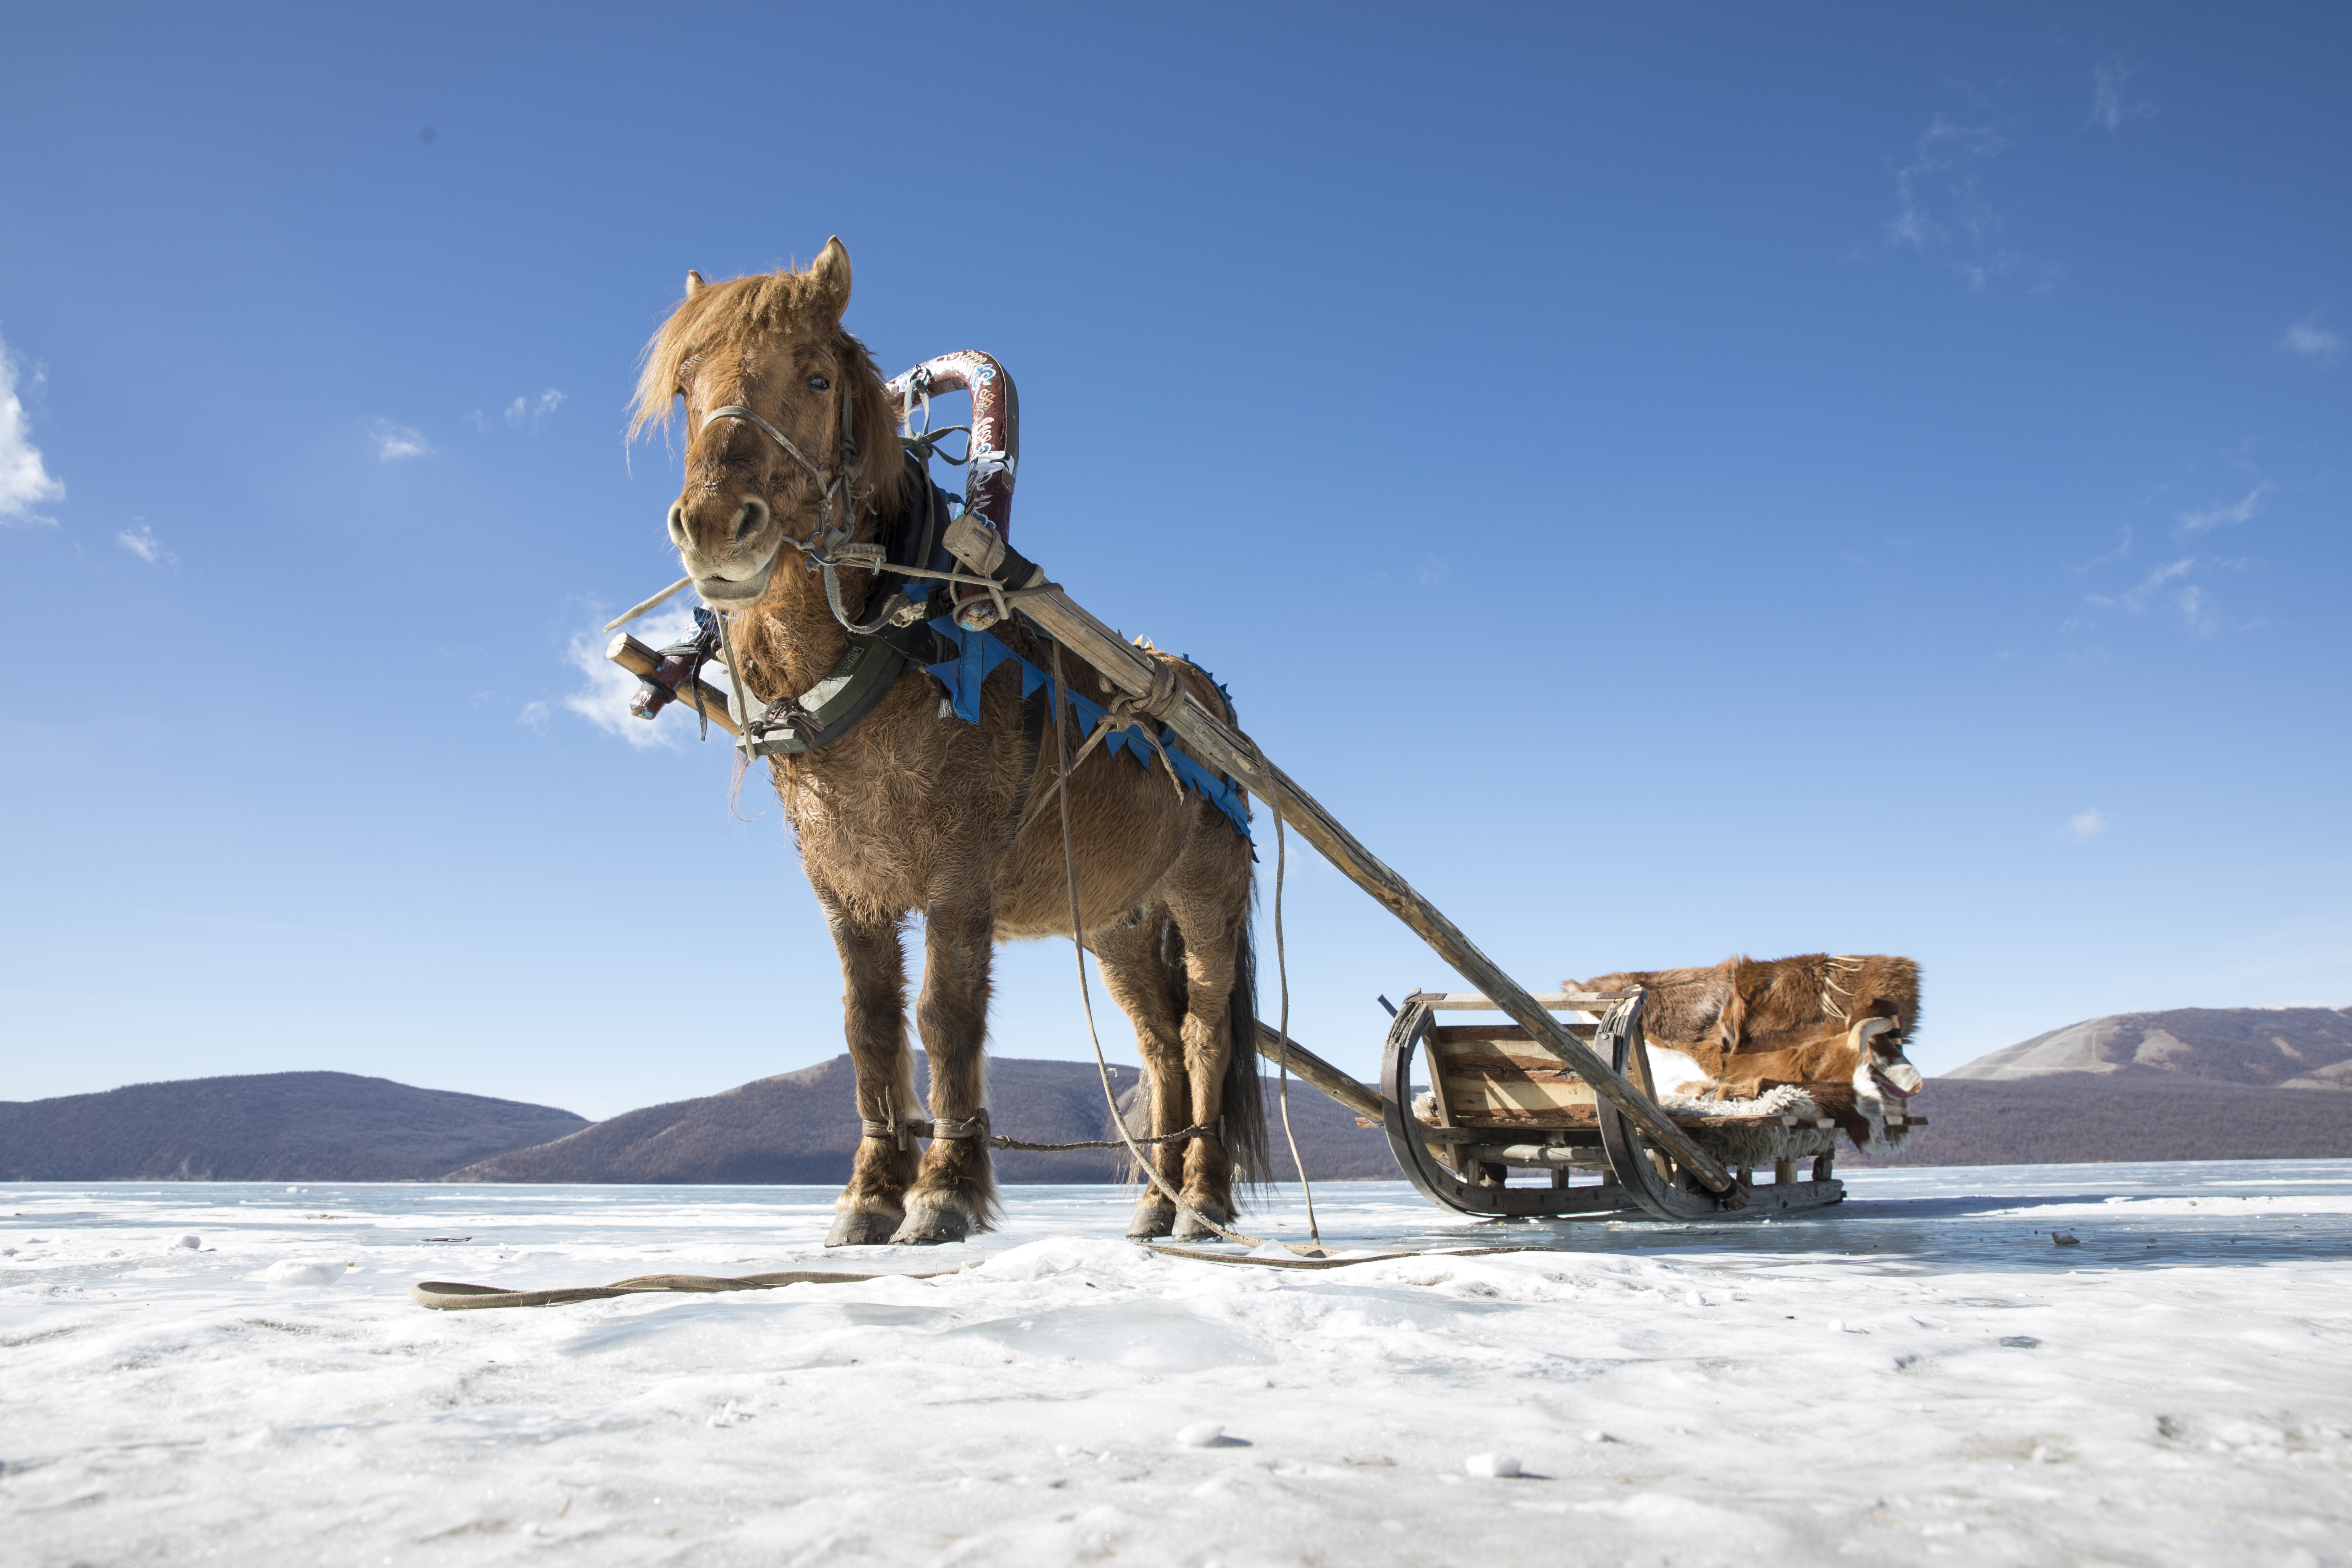 During a Mongolia horse sleigh expedition - Khovsgol